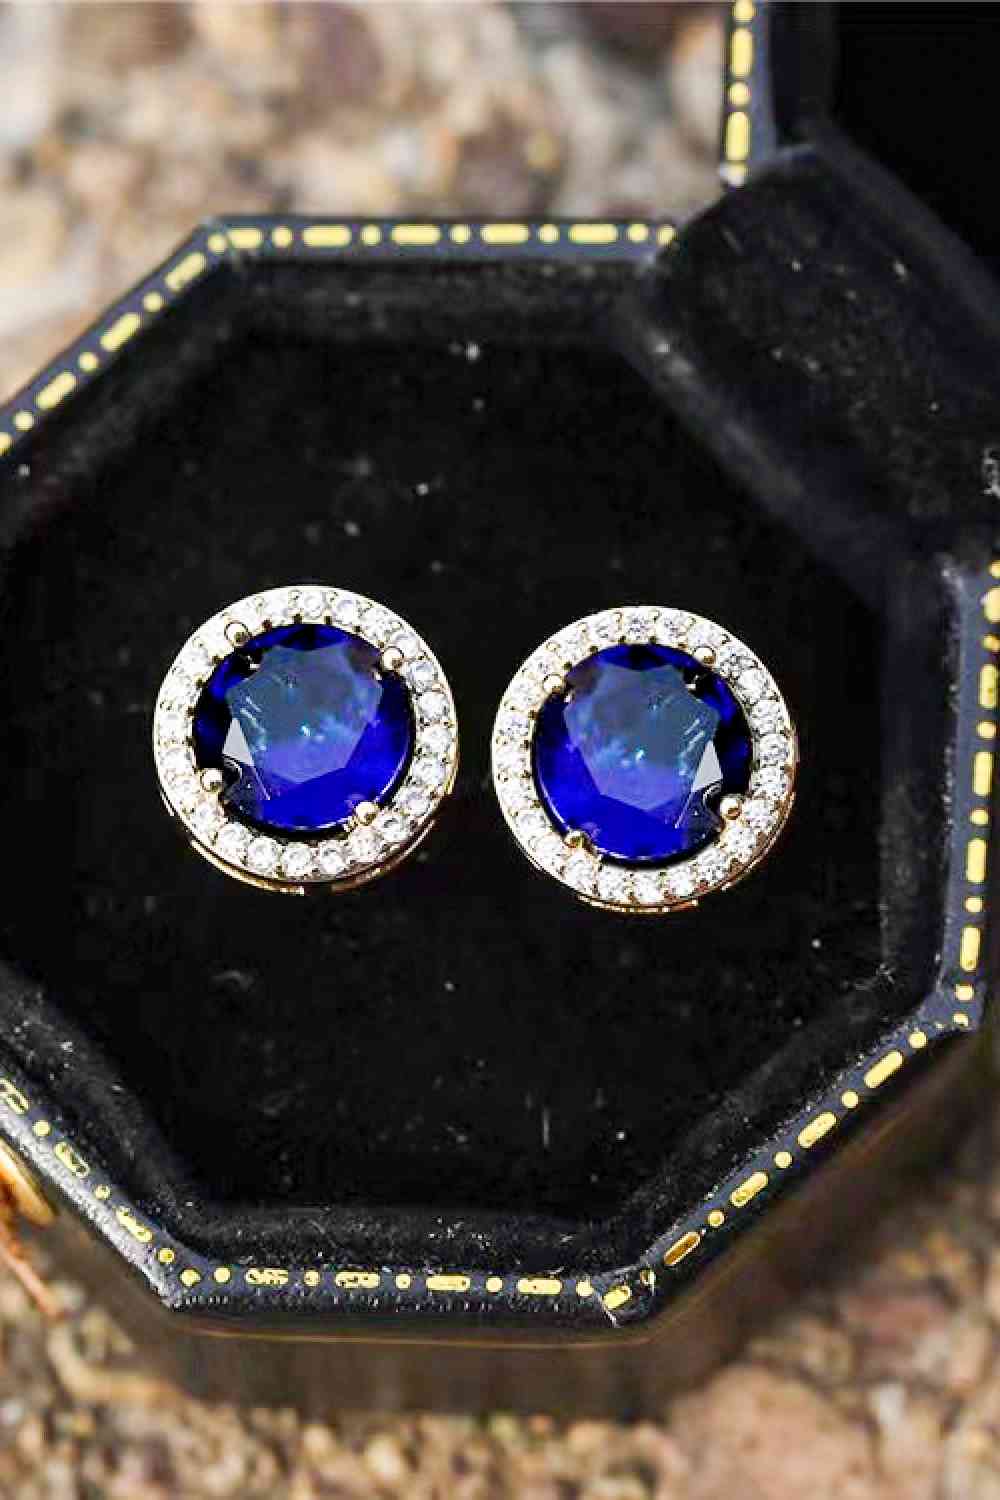 Contrast 2 Carat Moissanite Platinum-Plated Stud Earrings Blue One Size